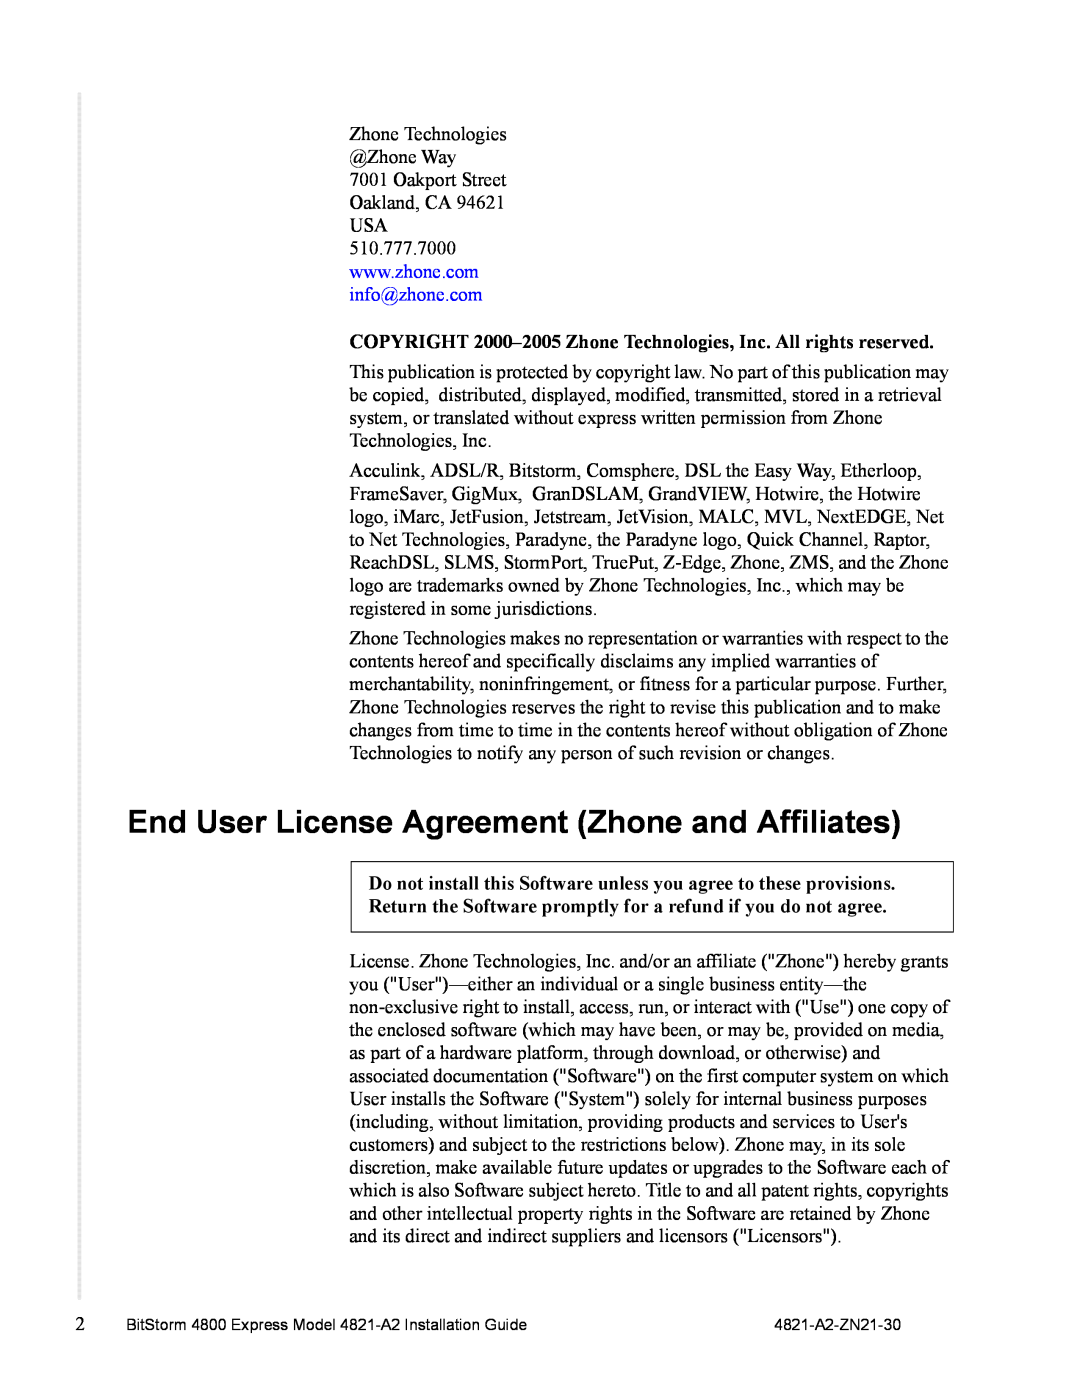 Zhone Technologies 4821-A2 manual End User License Agreement Zhone and Affiliates 